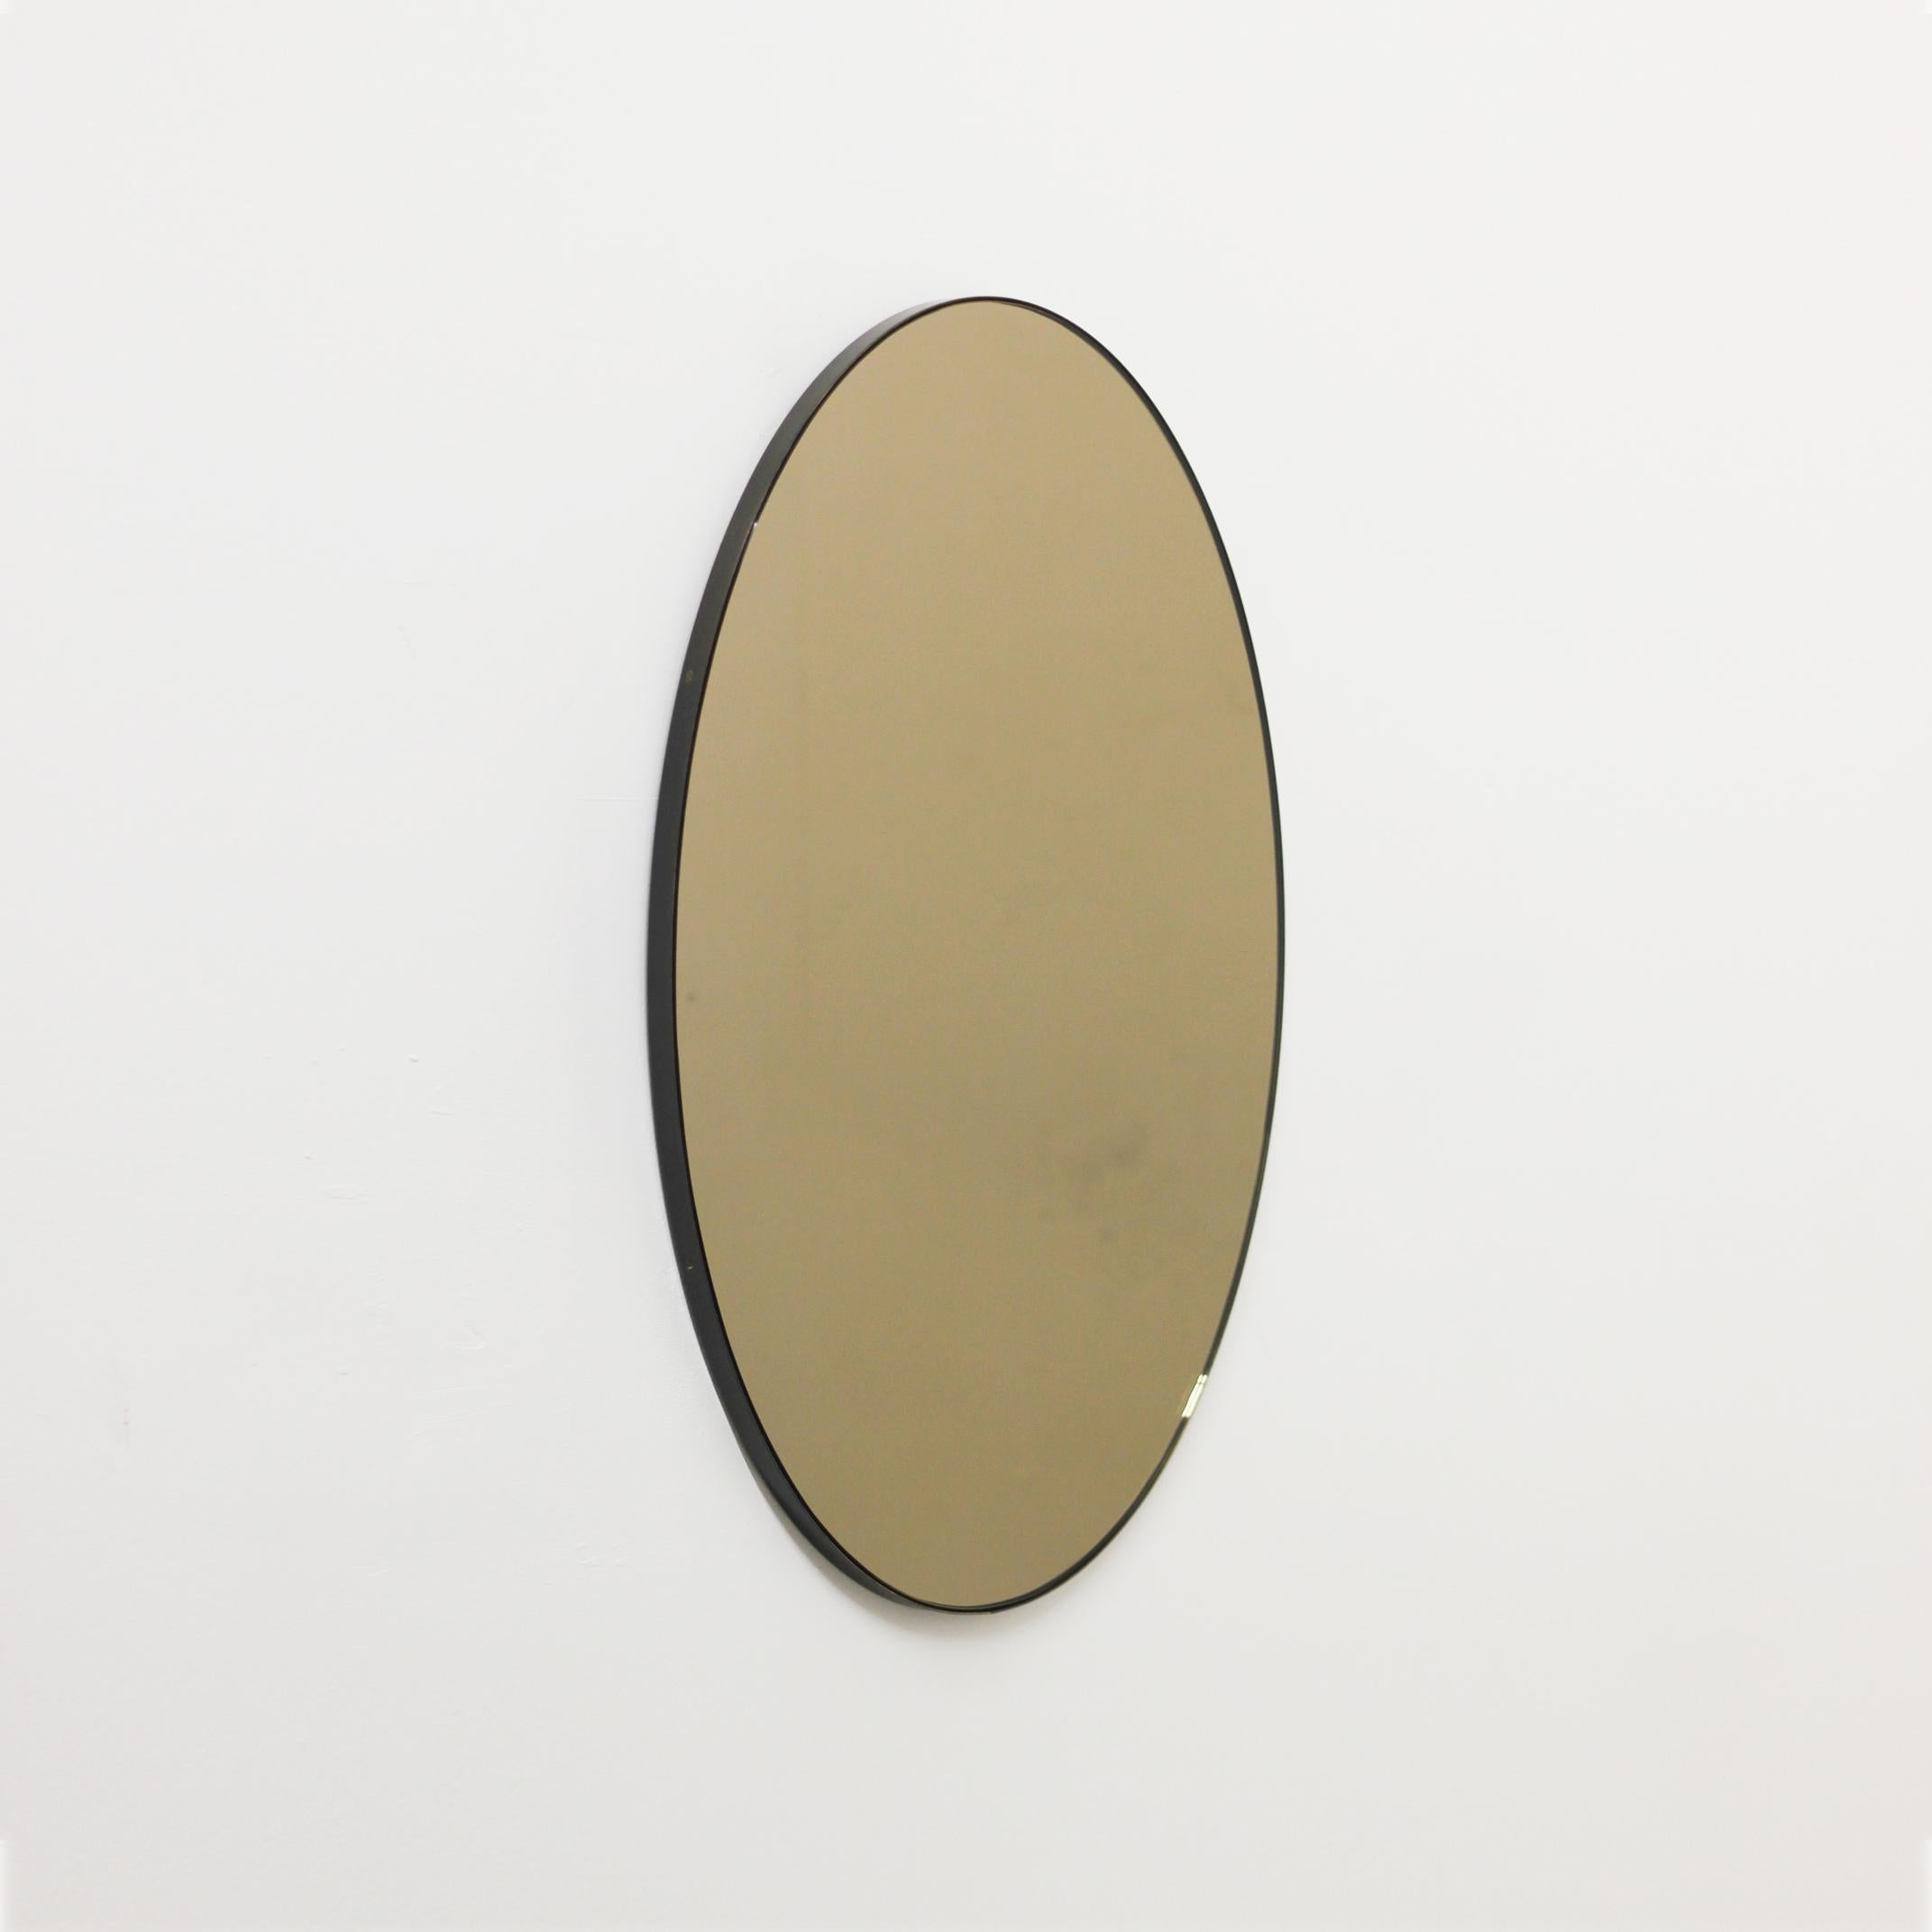 Organic Modern Ovalis Oval Bronze Tinted Contemporary Mirror with Patina Frame, Medium For Sale